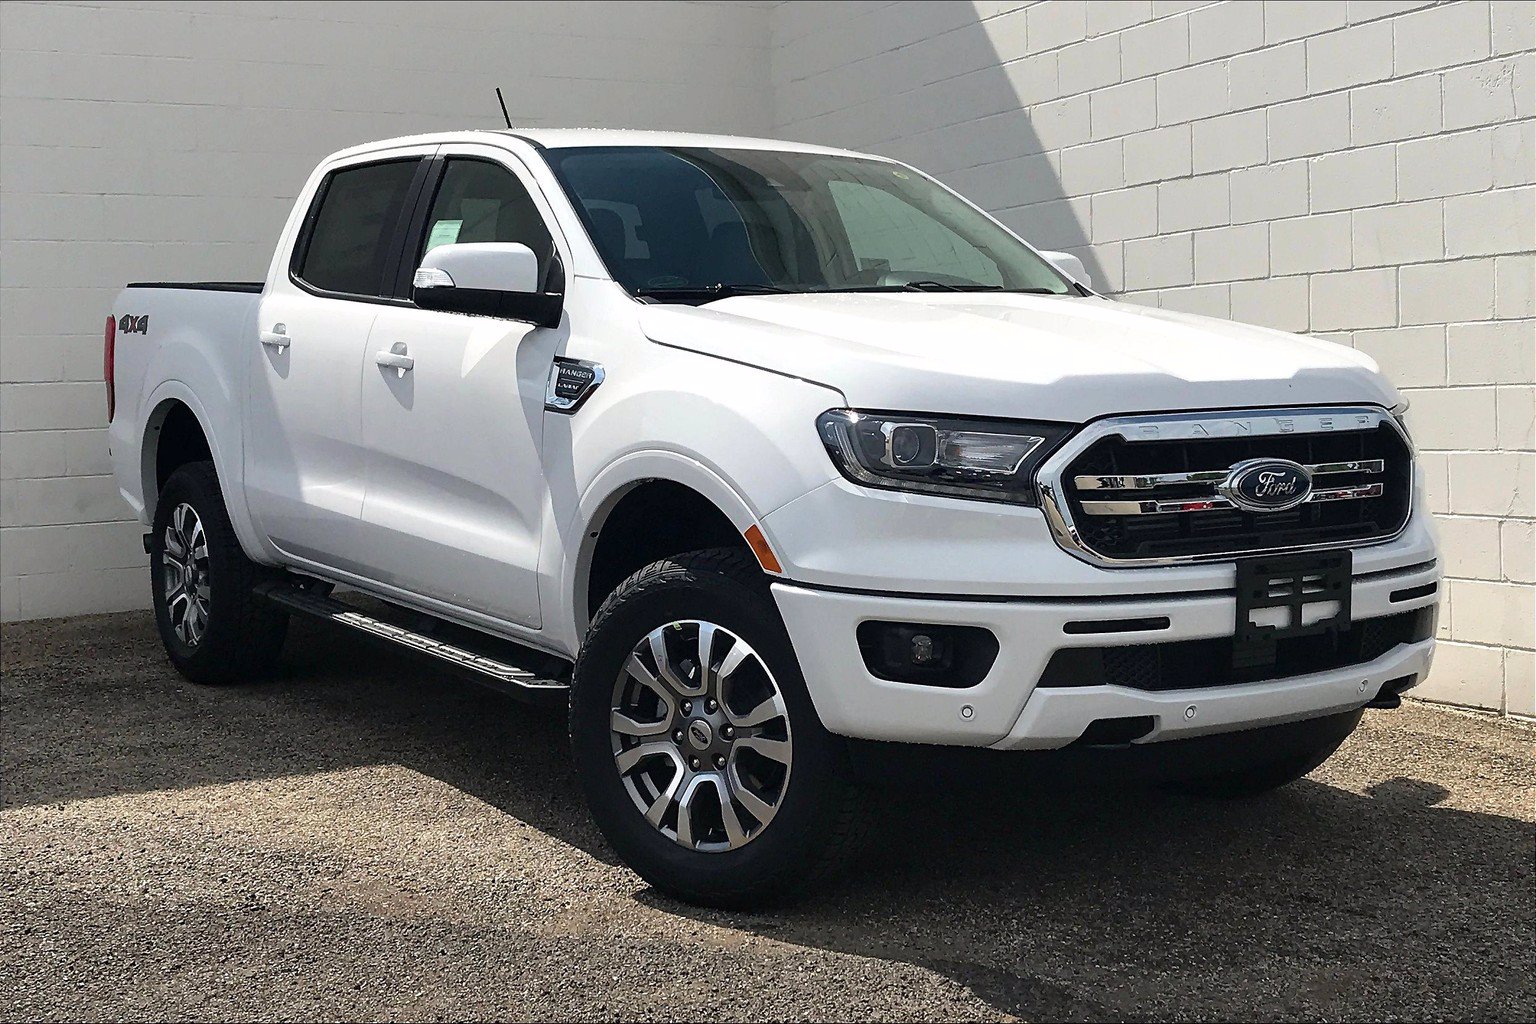 New 2020 Ford Ranger Lariat 4D Crew Cab in Morton #A47299 | Mike Murphy